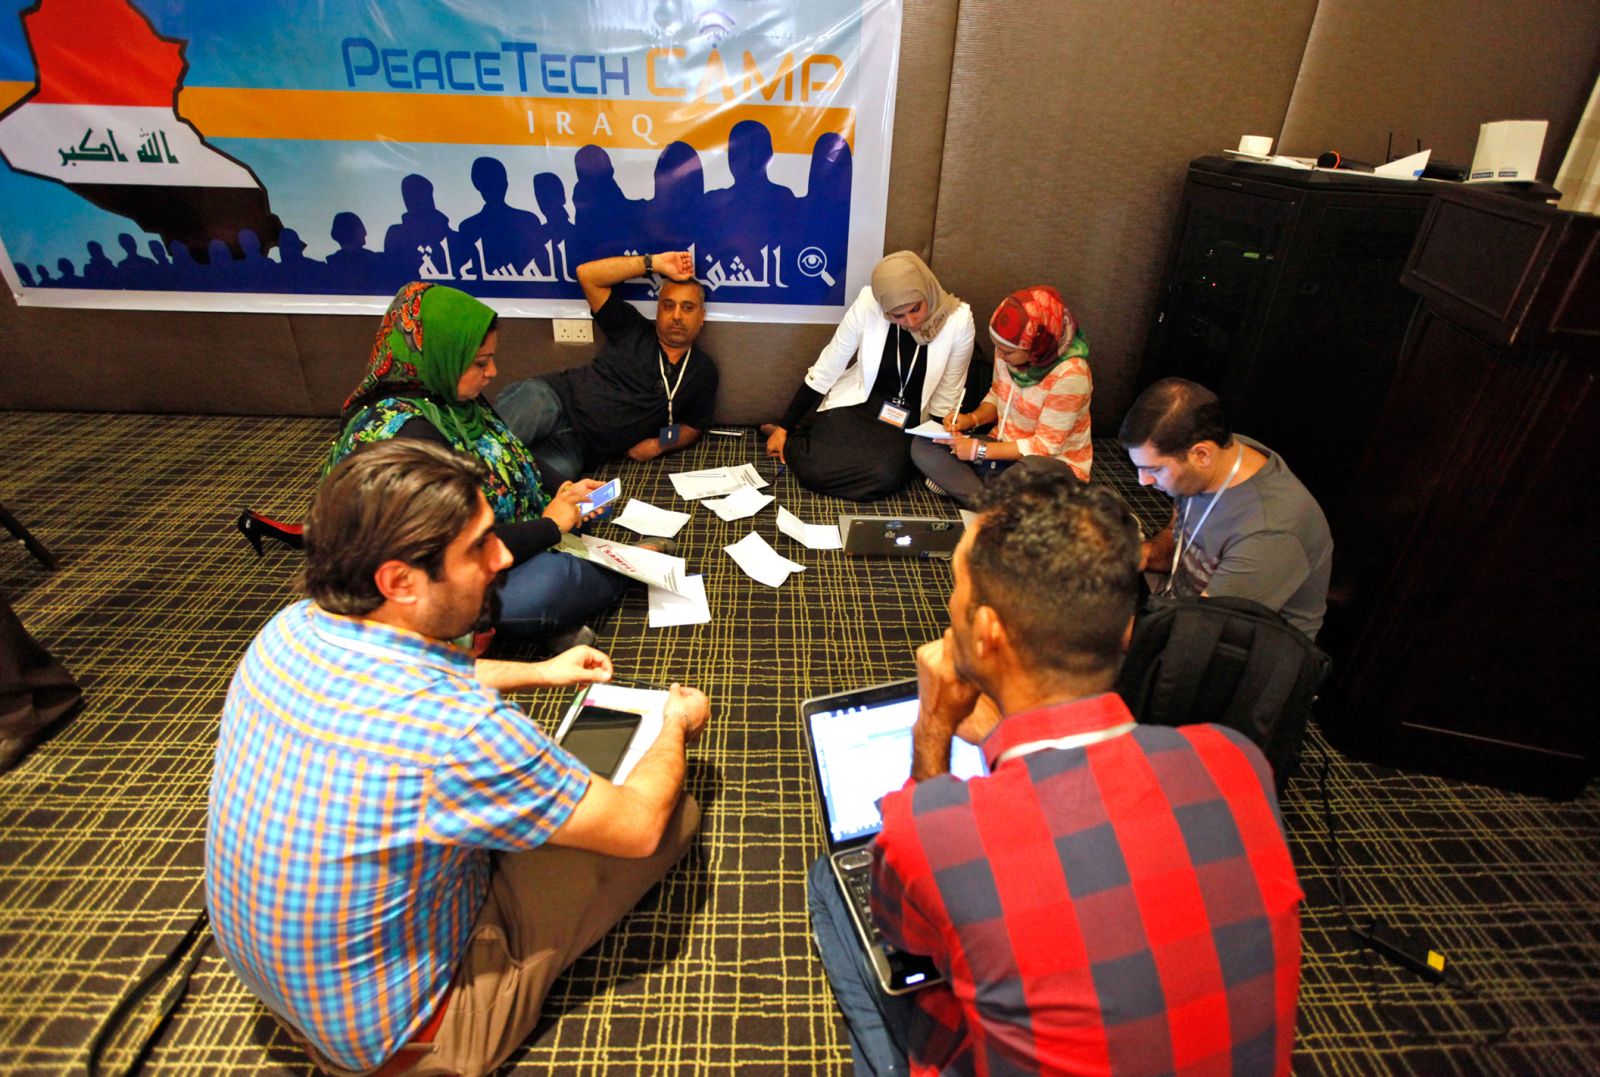 USIP Running ‘PeaceTech Camps’ in Iraq